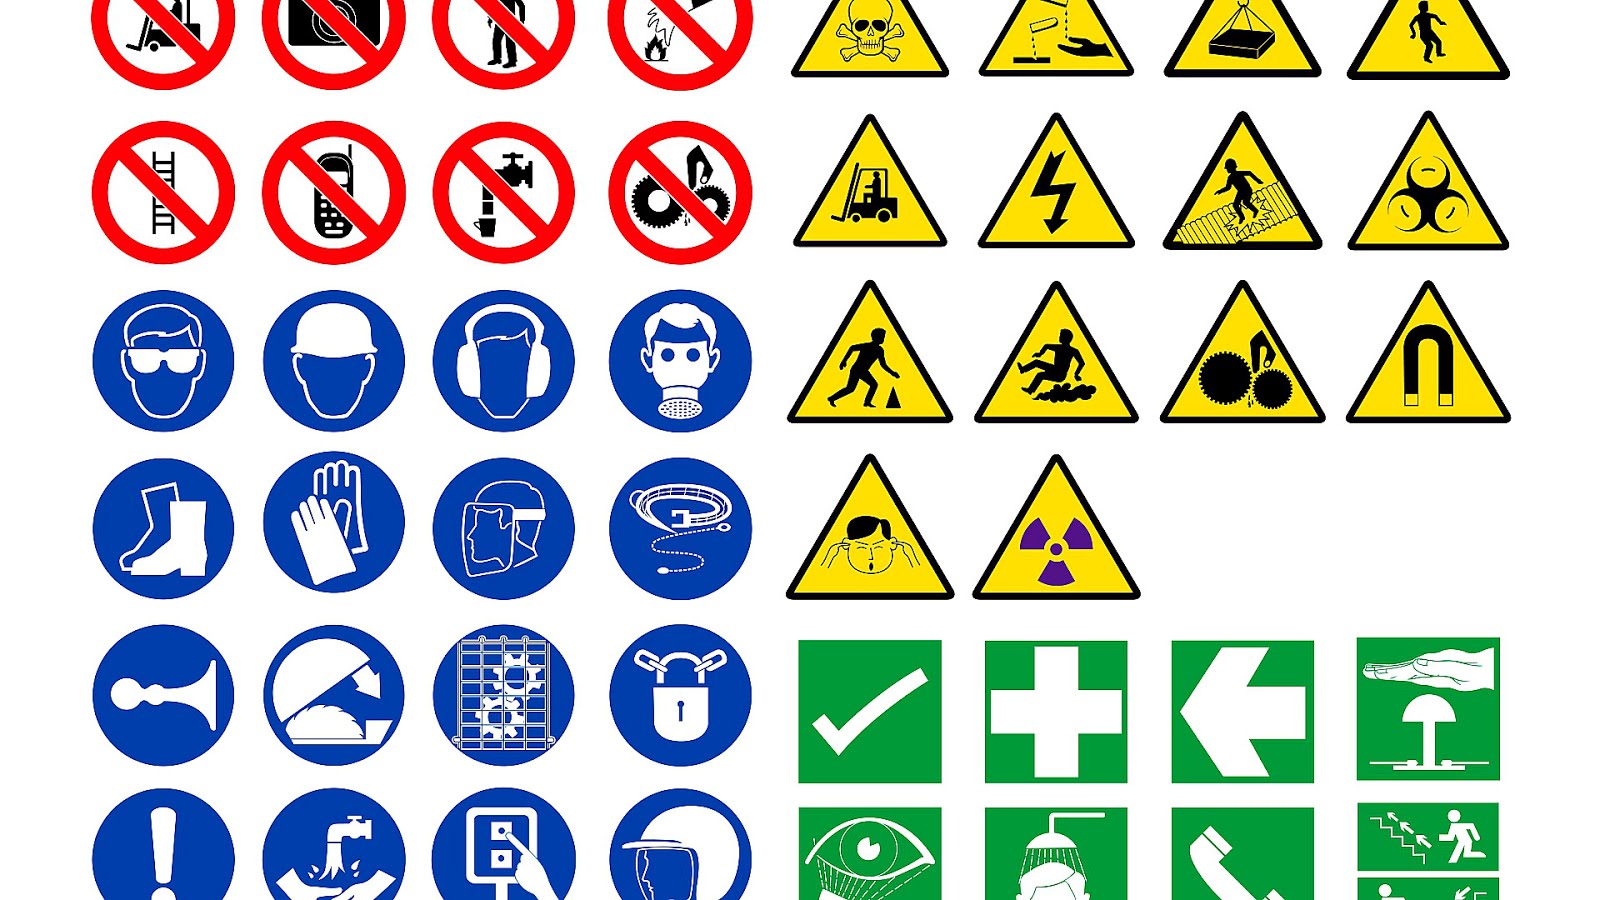 Fire Safety Signs And Symbols